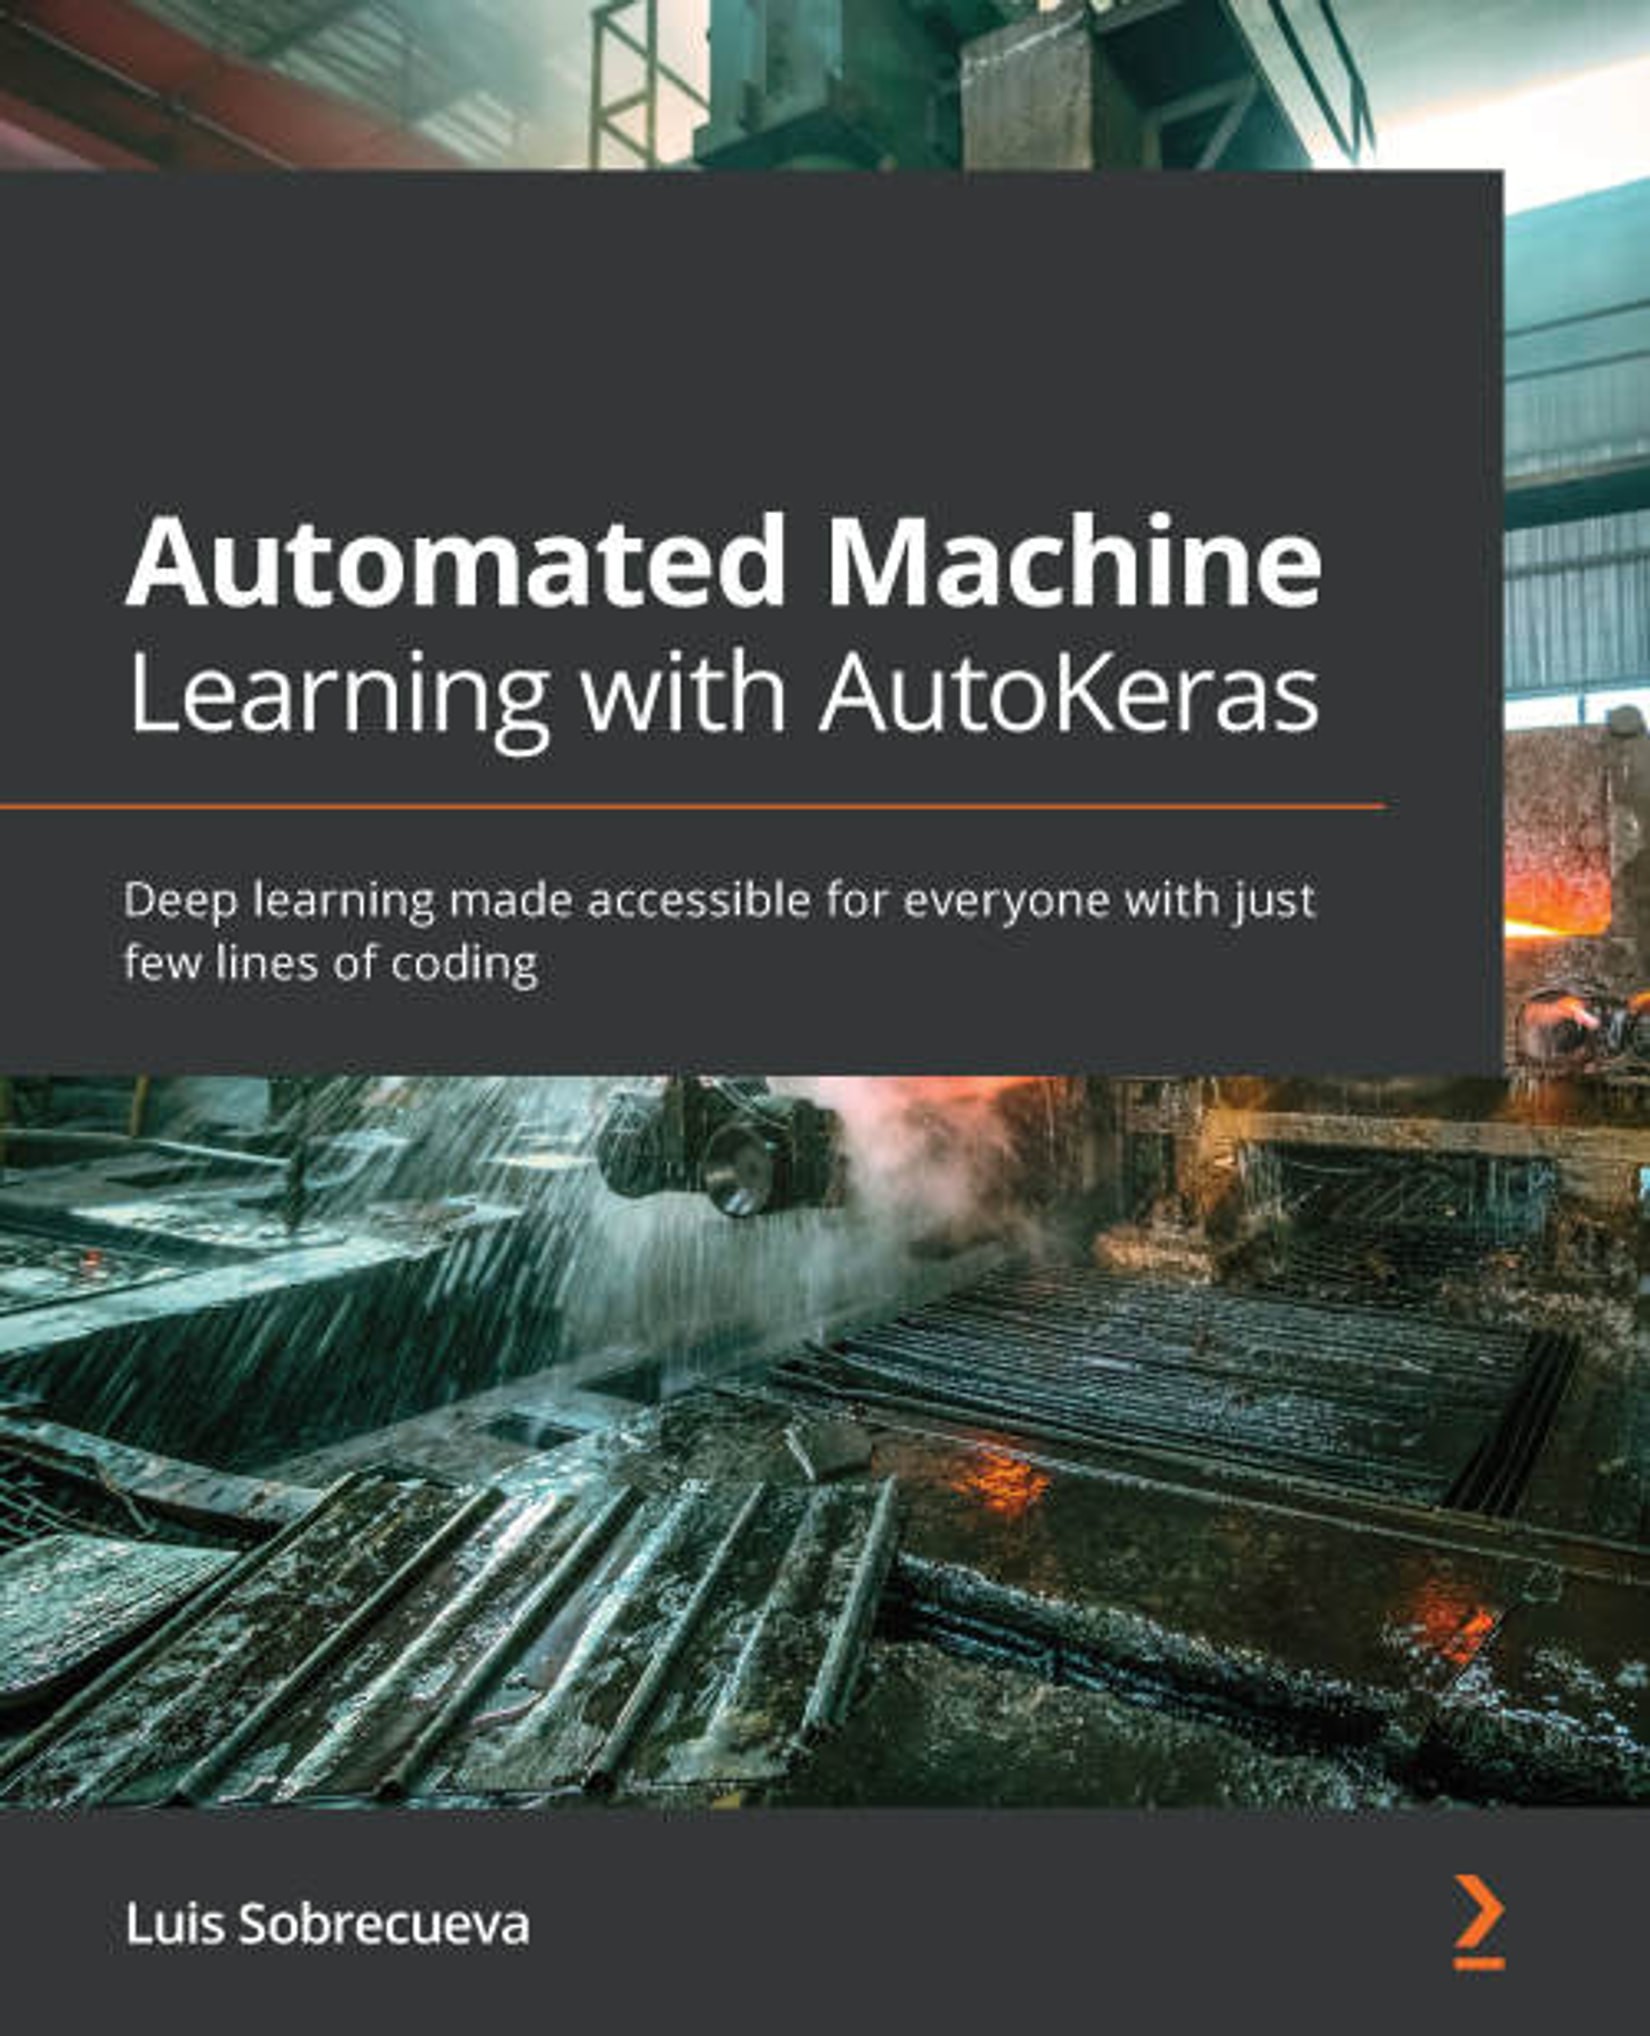 Automated Machine Learning With AutoKeras: Deep Learning Made Accessible for Everyone With Just Few Lines of Coding